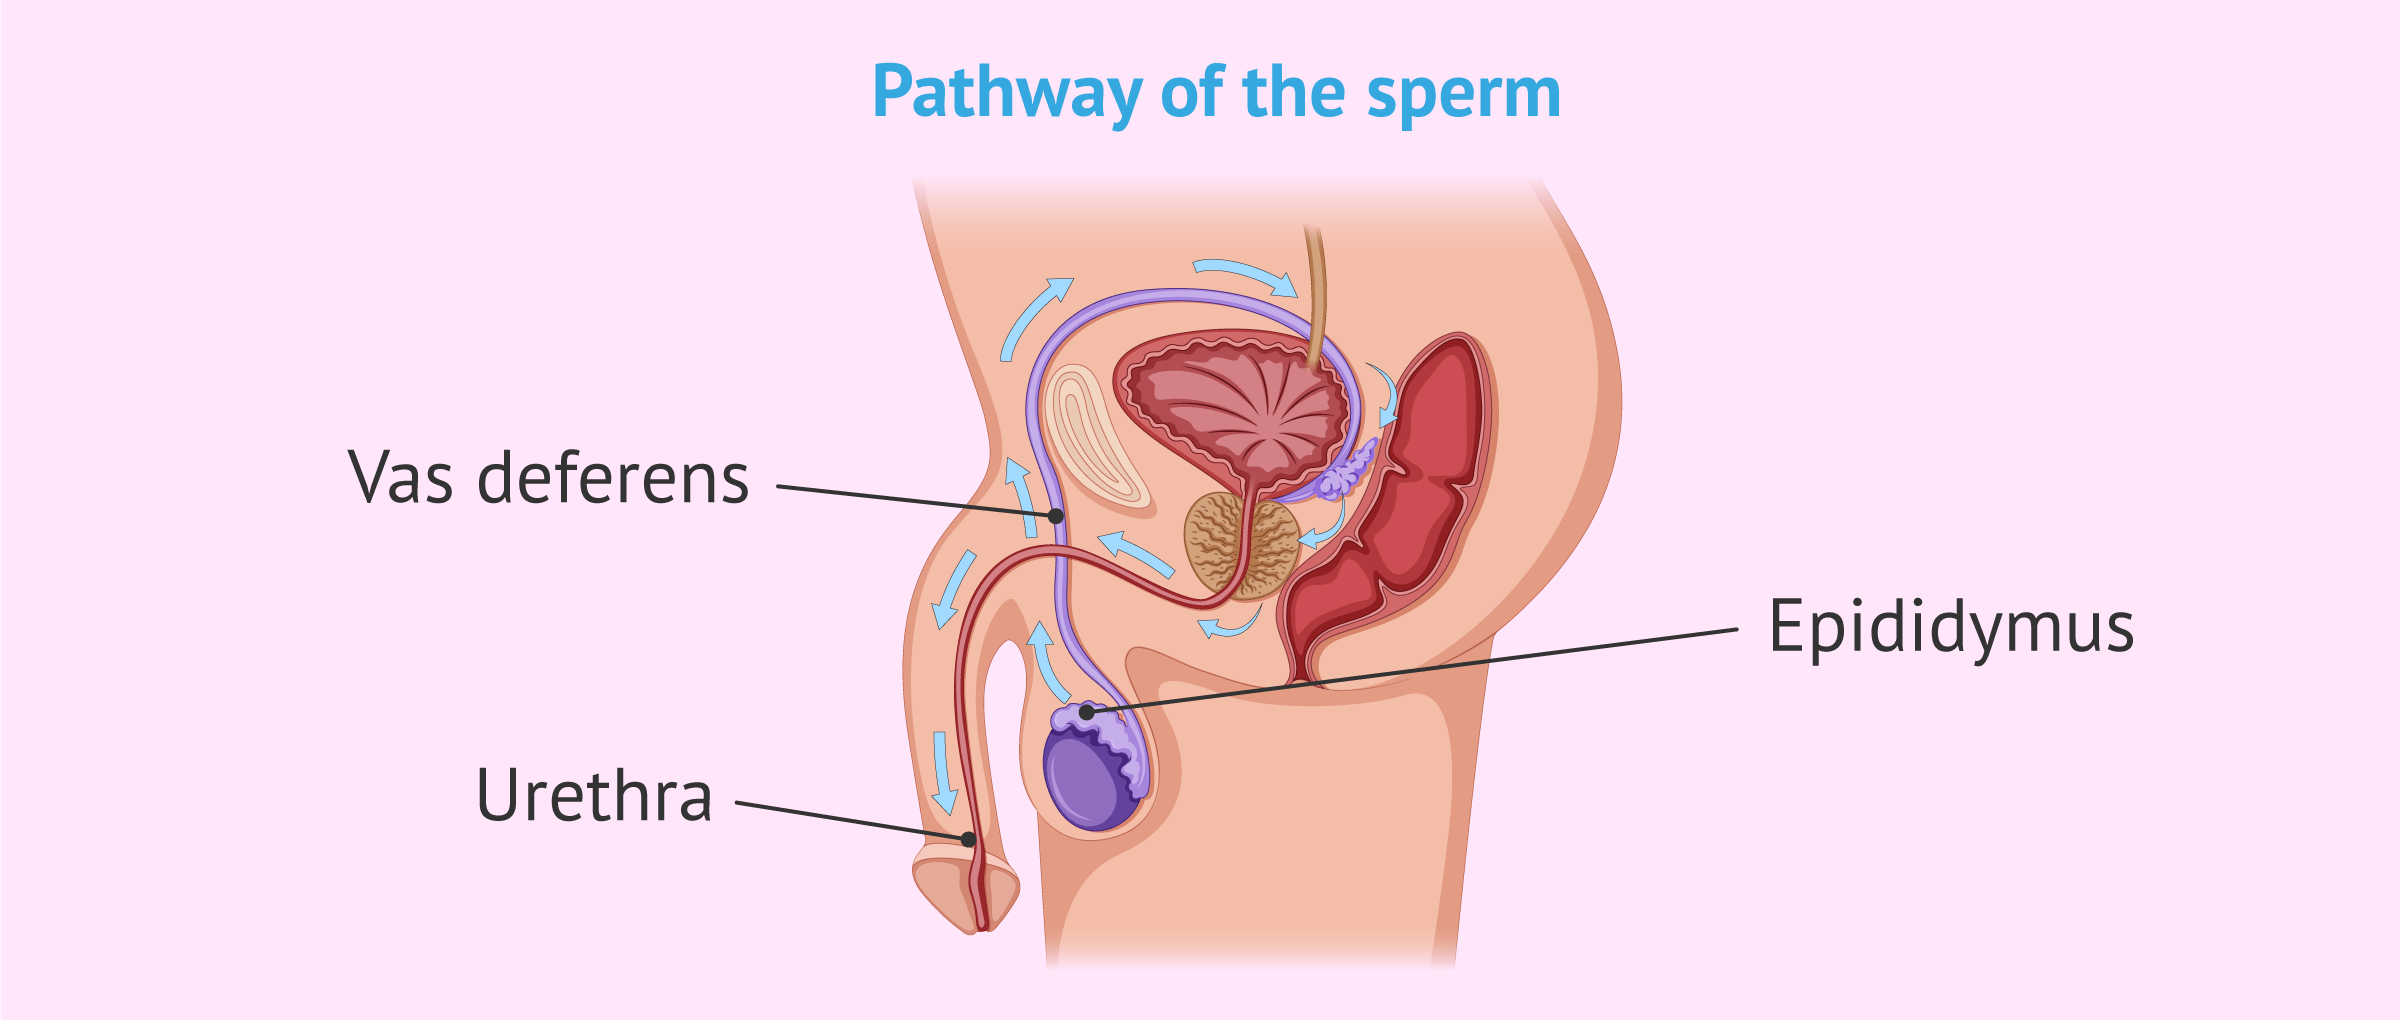 Transport pathway of the sperm